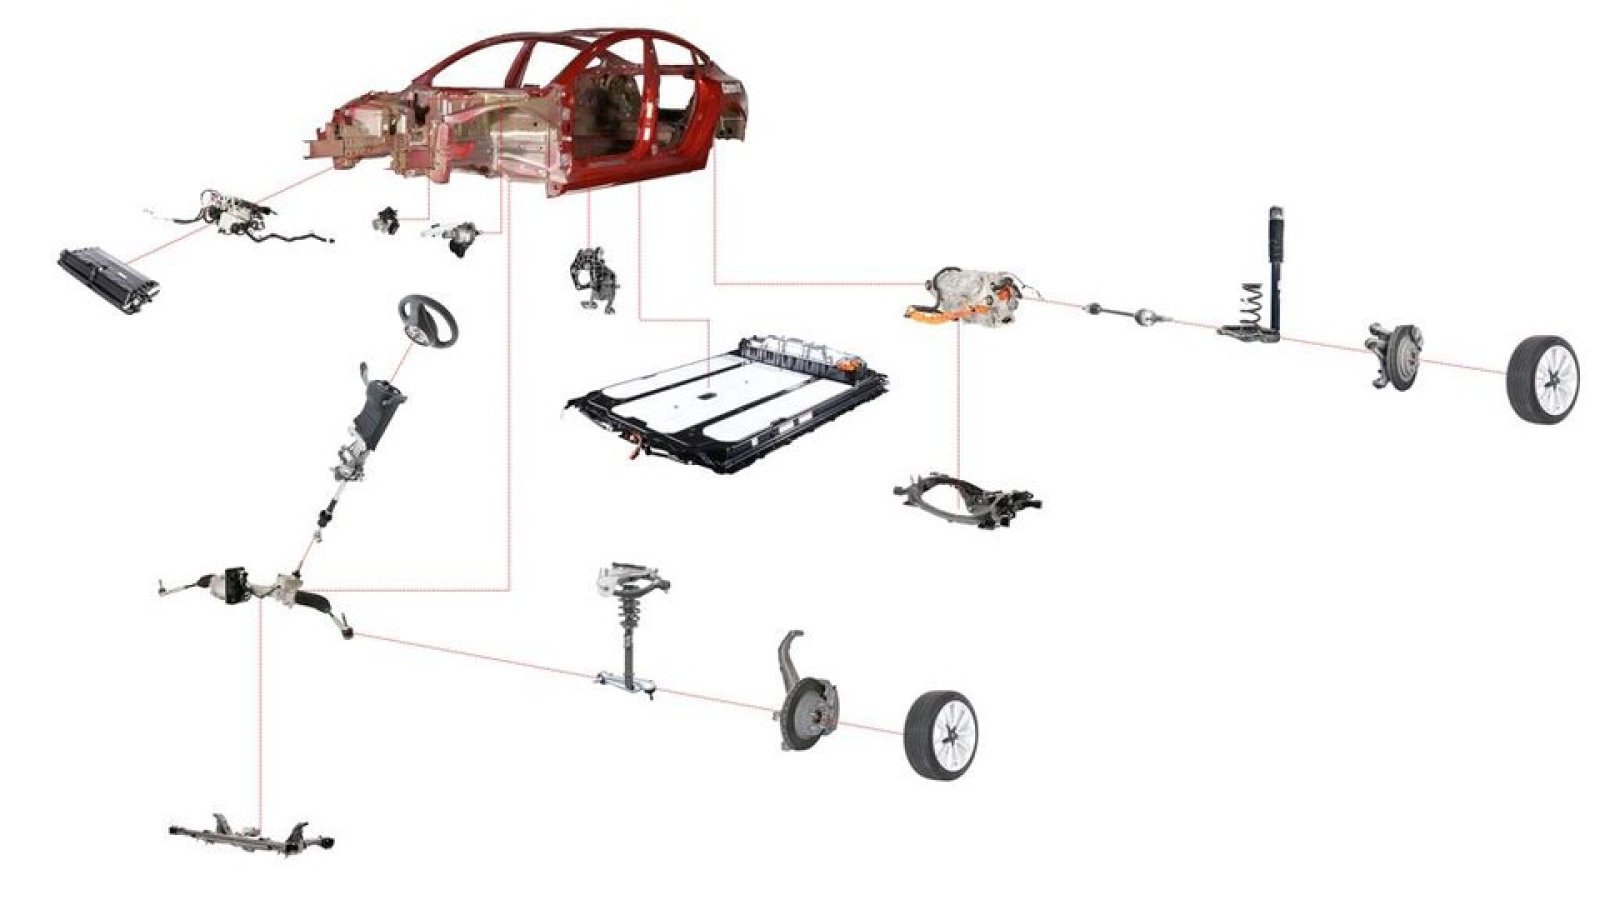 Deconstructed parts of a Tesla Model, photo provided by Caresoft images.